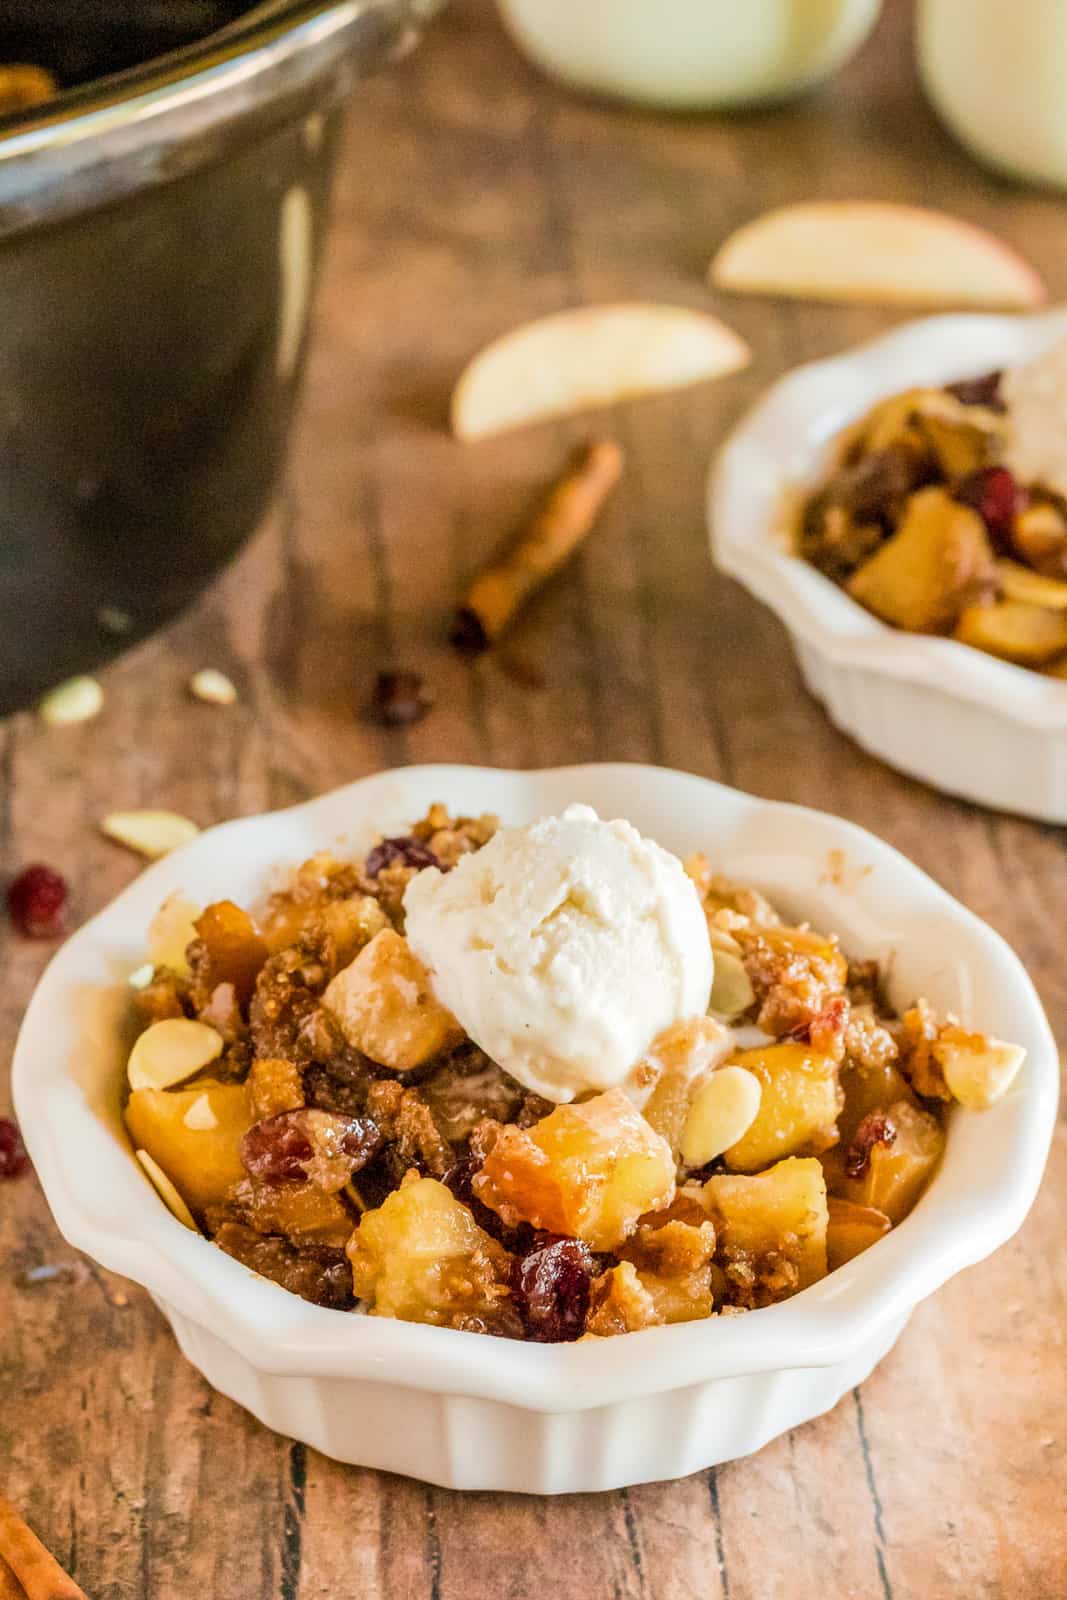 Bowl of Easy Apple Crumble next to crockpot